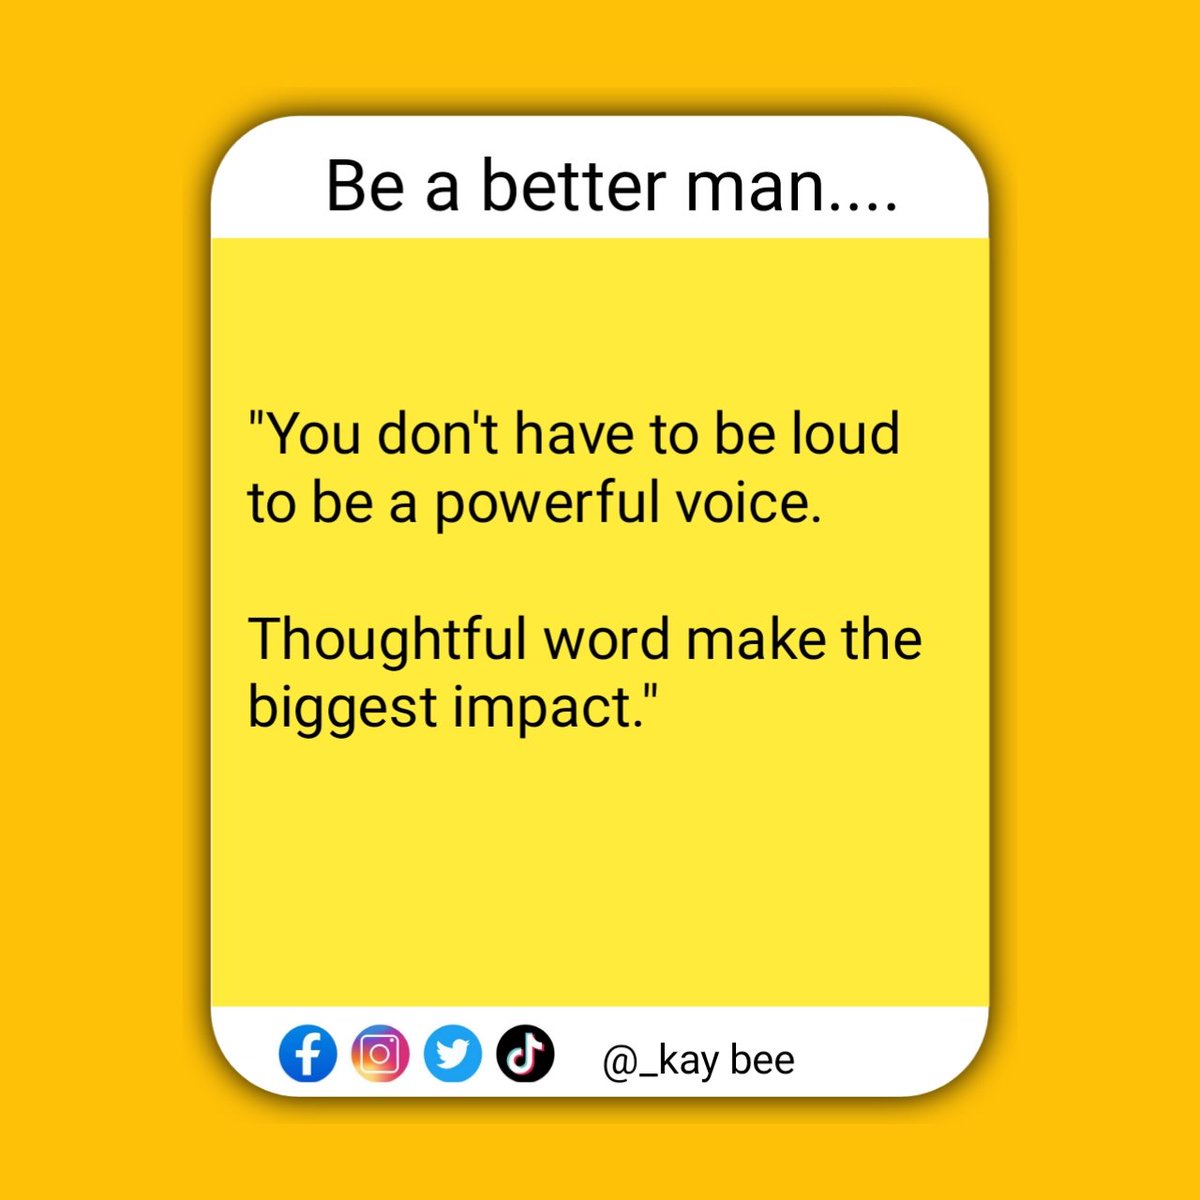 Thoughtful word make the biggest inpact